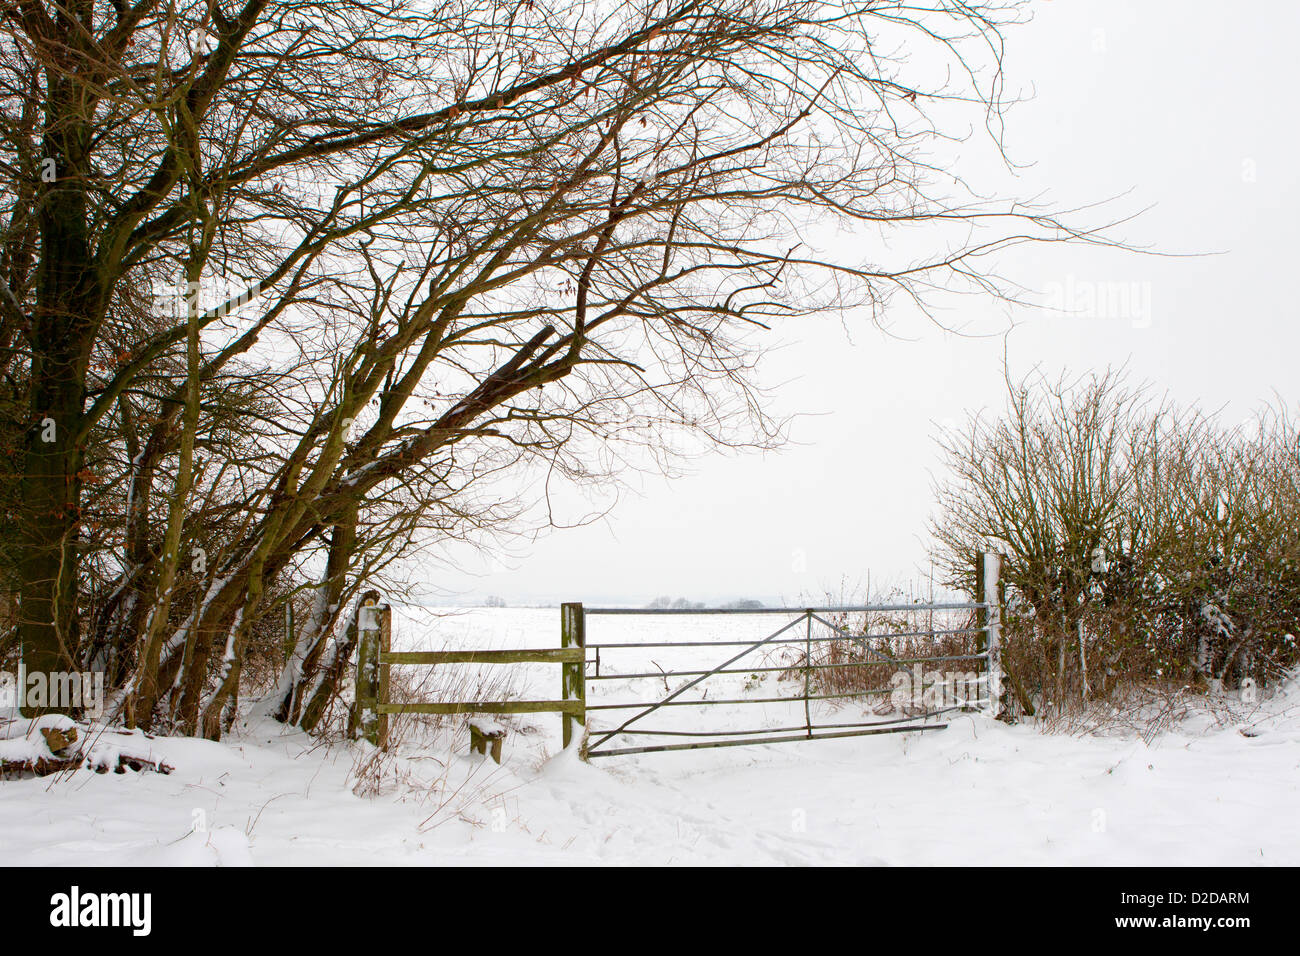 Winter landscape on the Downs near the village of Cherhill in Wiltshire, England, UK. Stock Photo